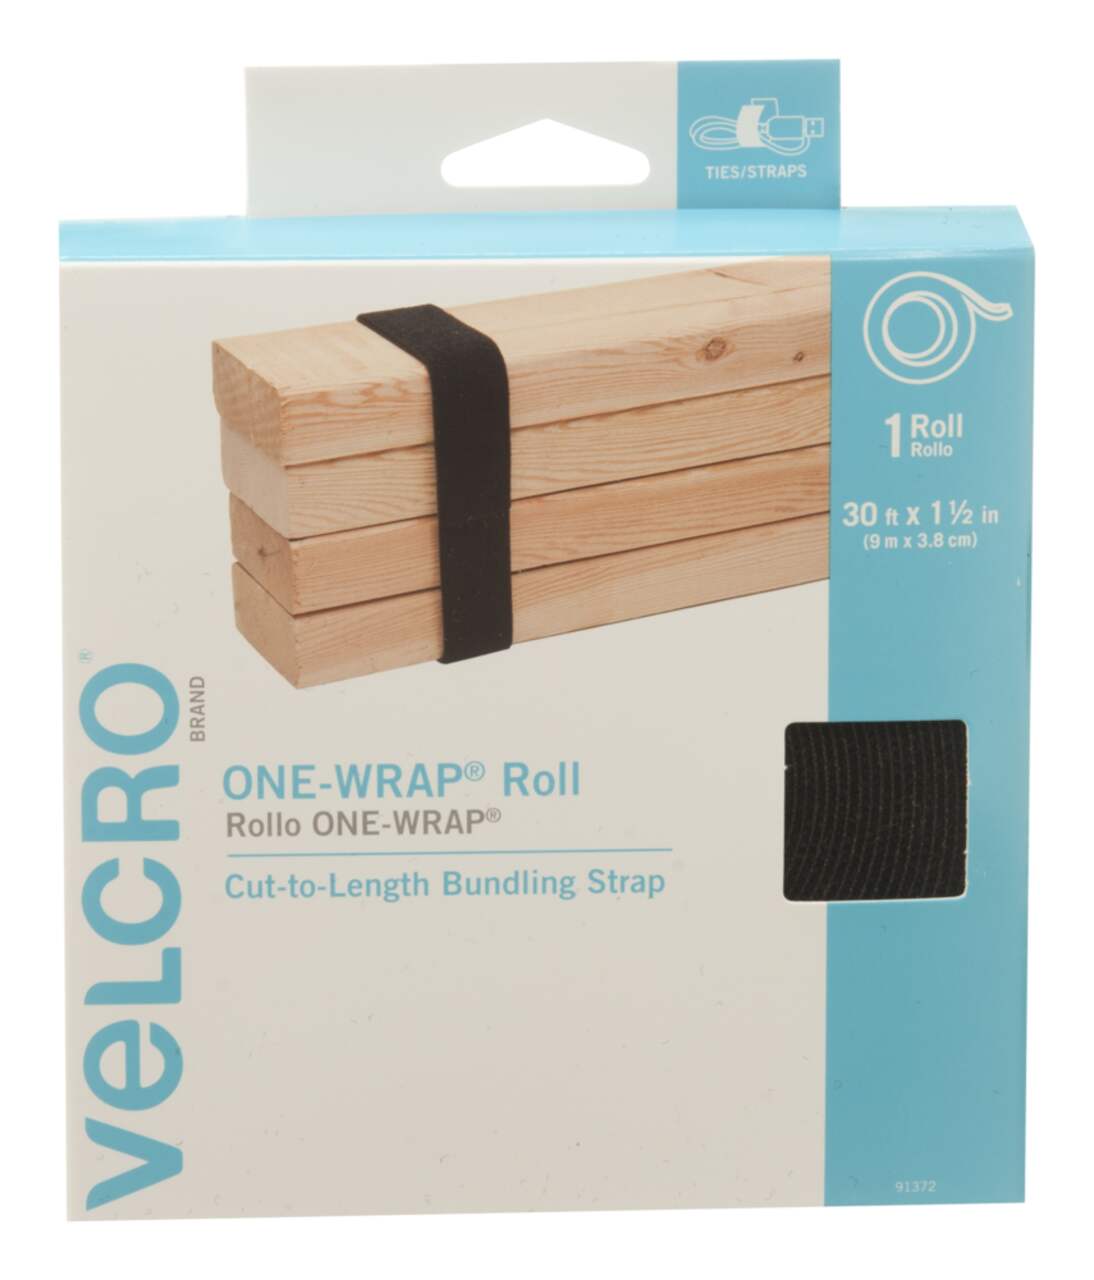 VELCRO® Brand Reusable ONE-WRAP® Strap Dbl Sided 1 X 15ft (5 yards) Black